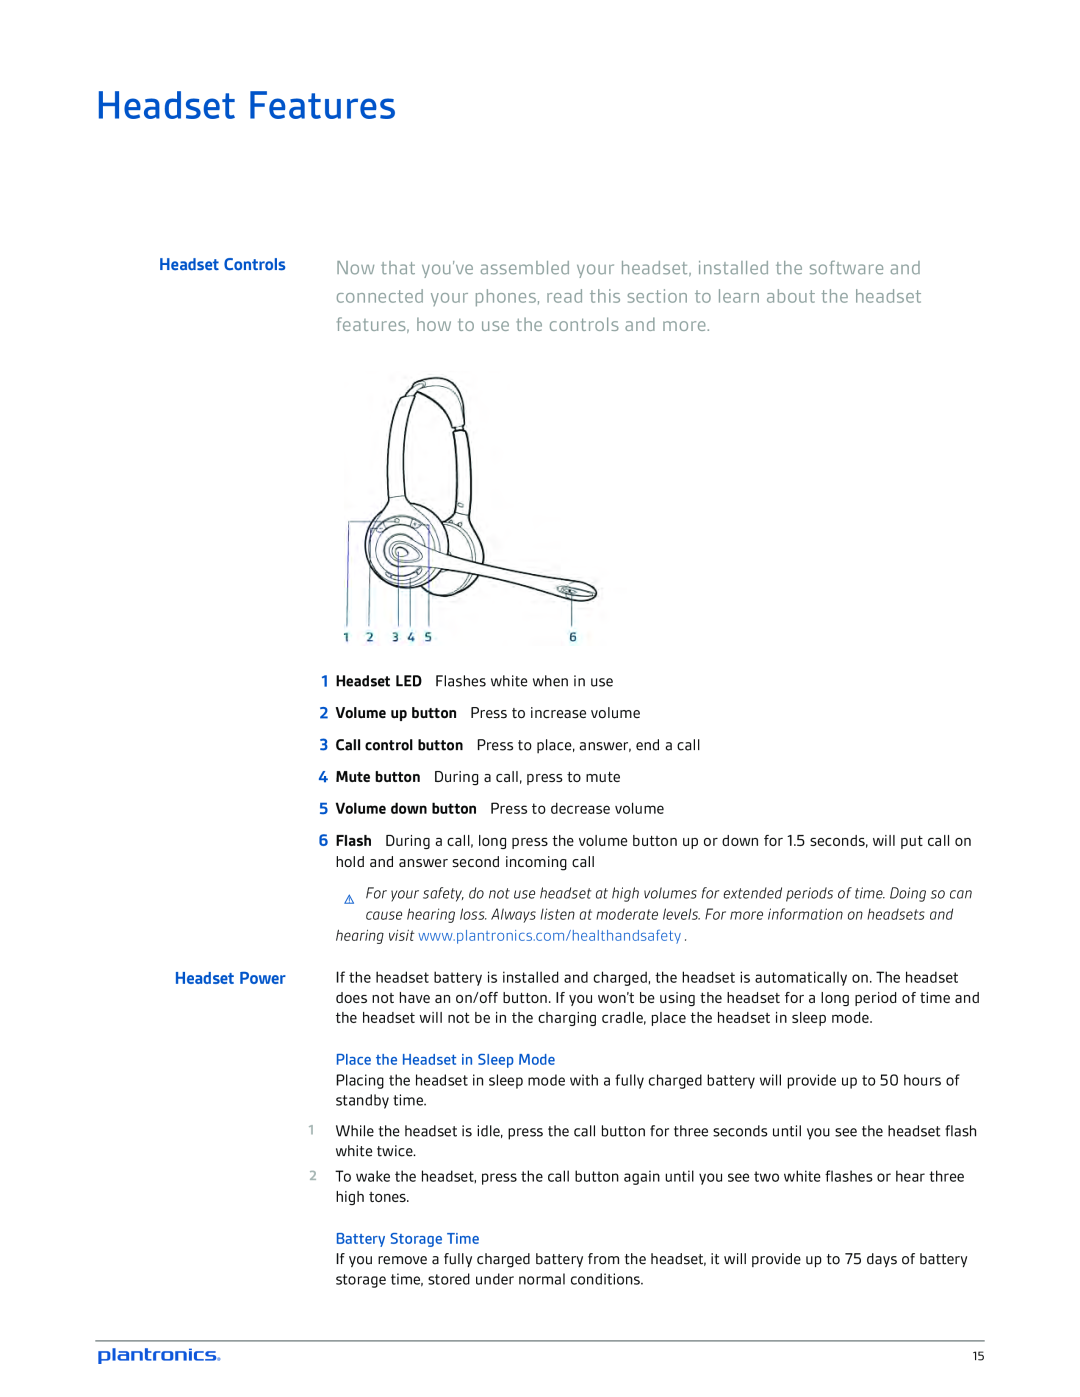 Plantronics W710-M, W720-M manual Headset Features, Headset Power, Place the Headset in Sleep Mode, Battery Storage Time 